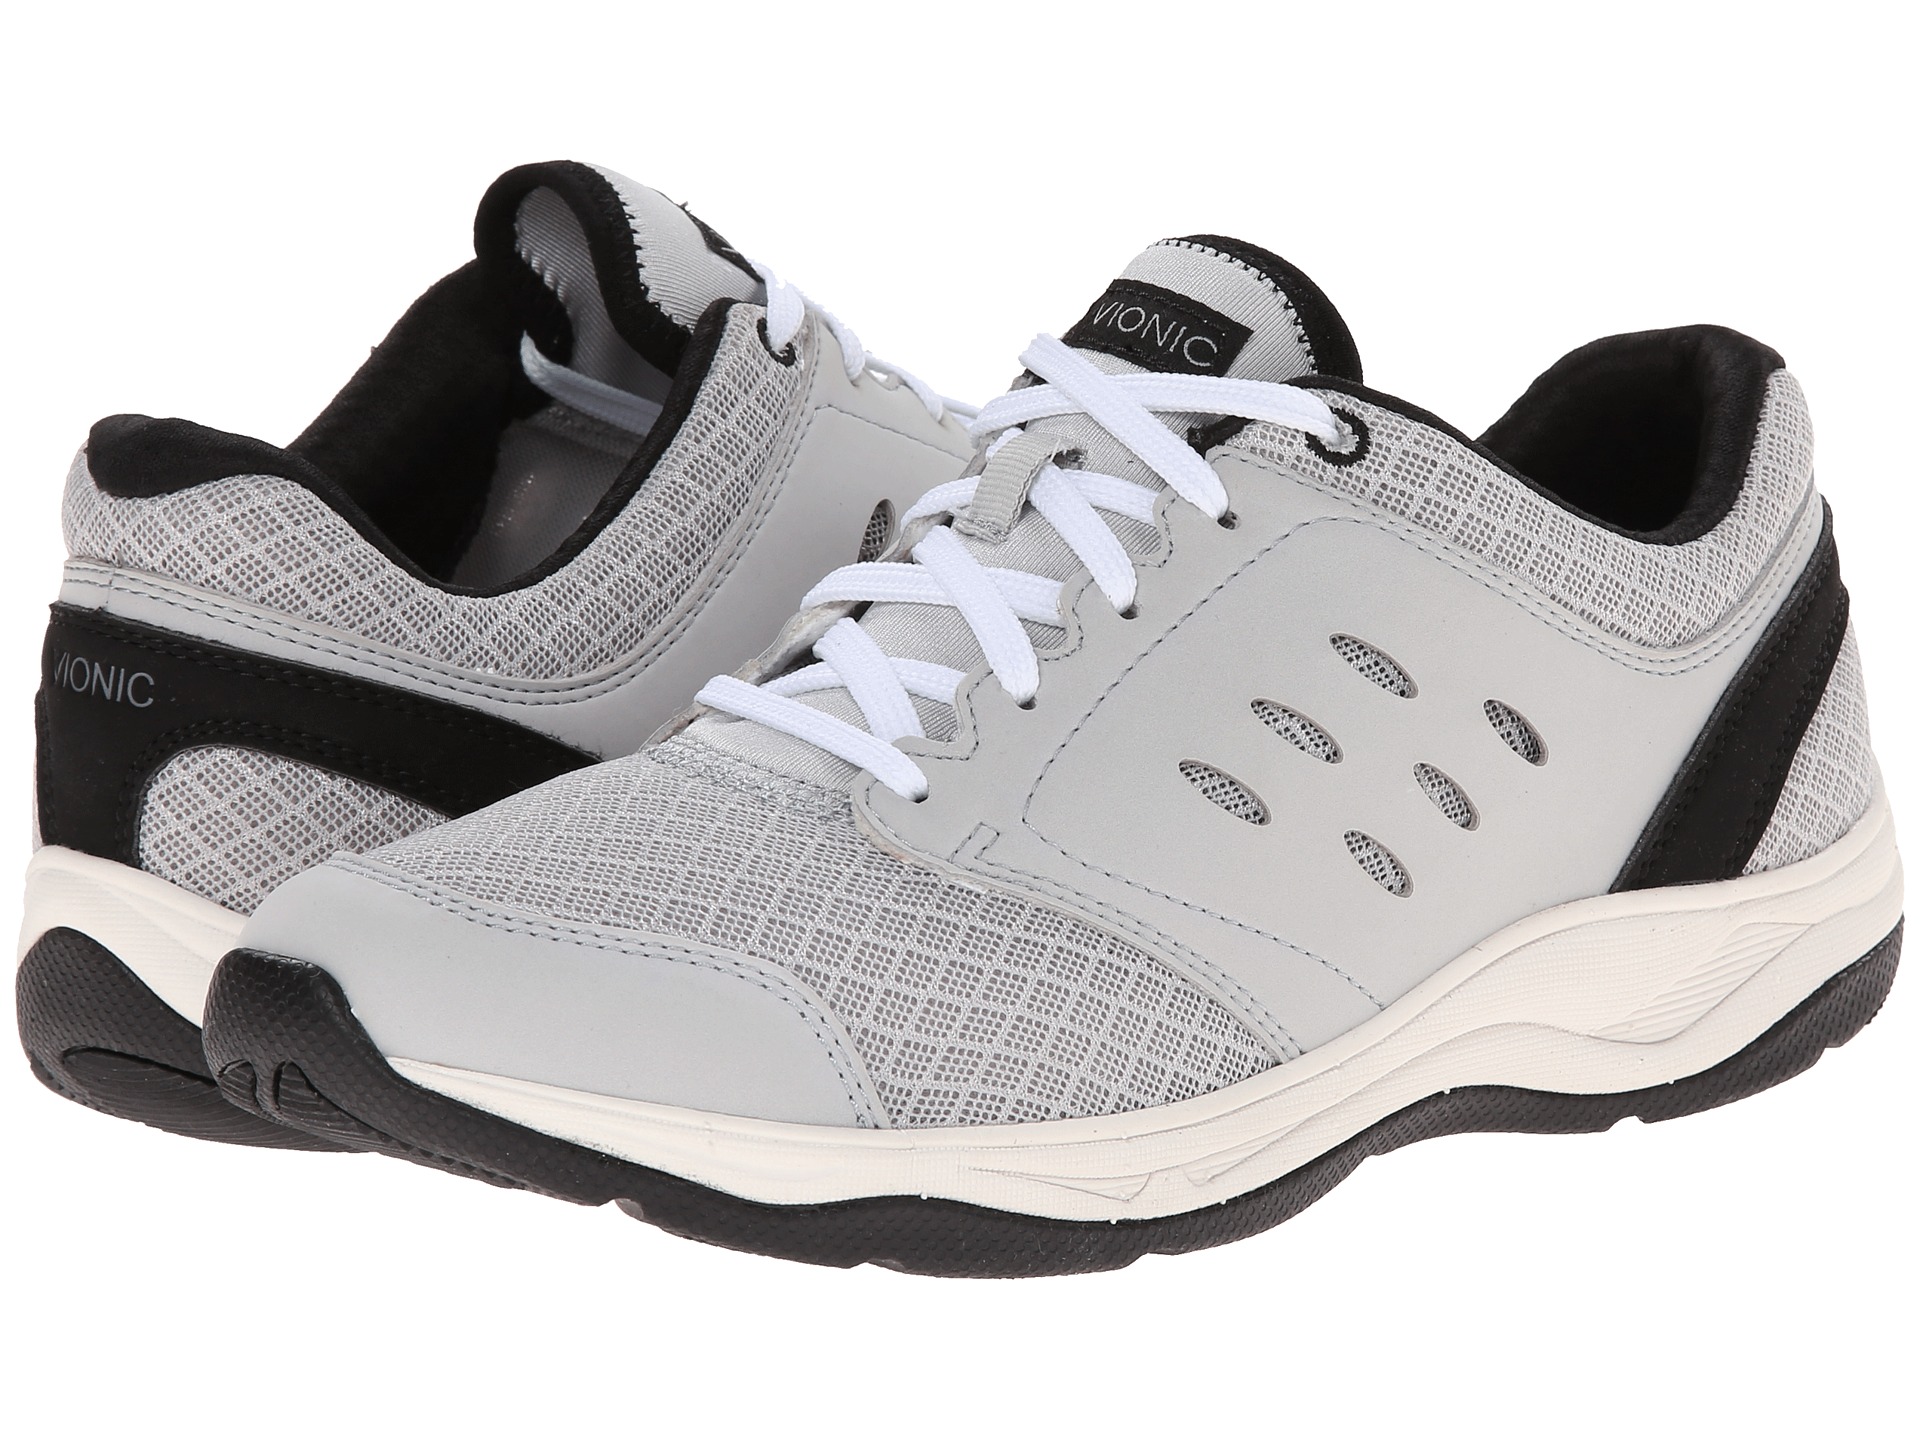 VIONIC Contest Active Lace-Up Light Grey - Zappos.com Free Shipping ...